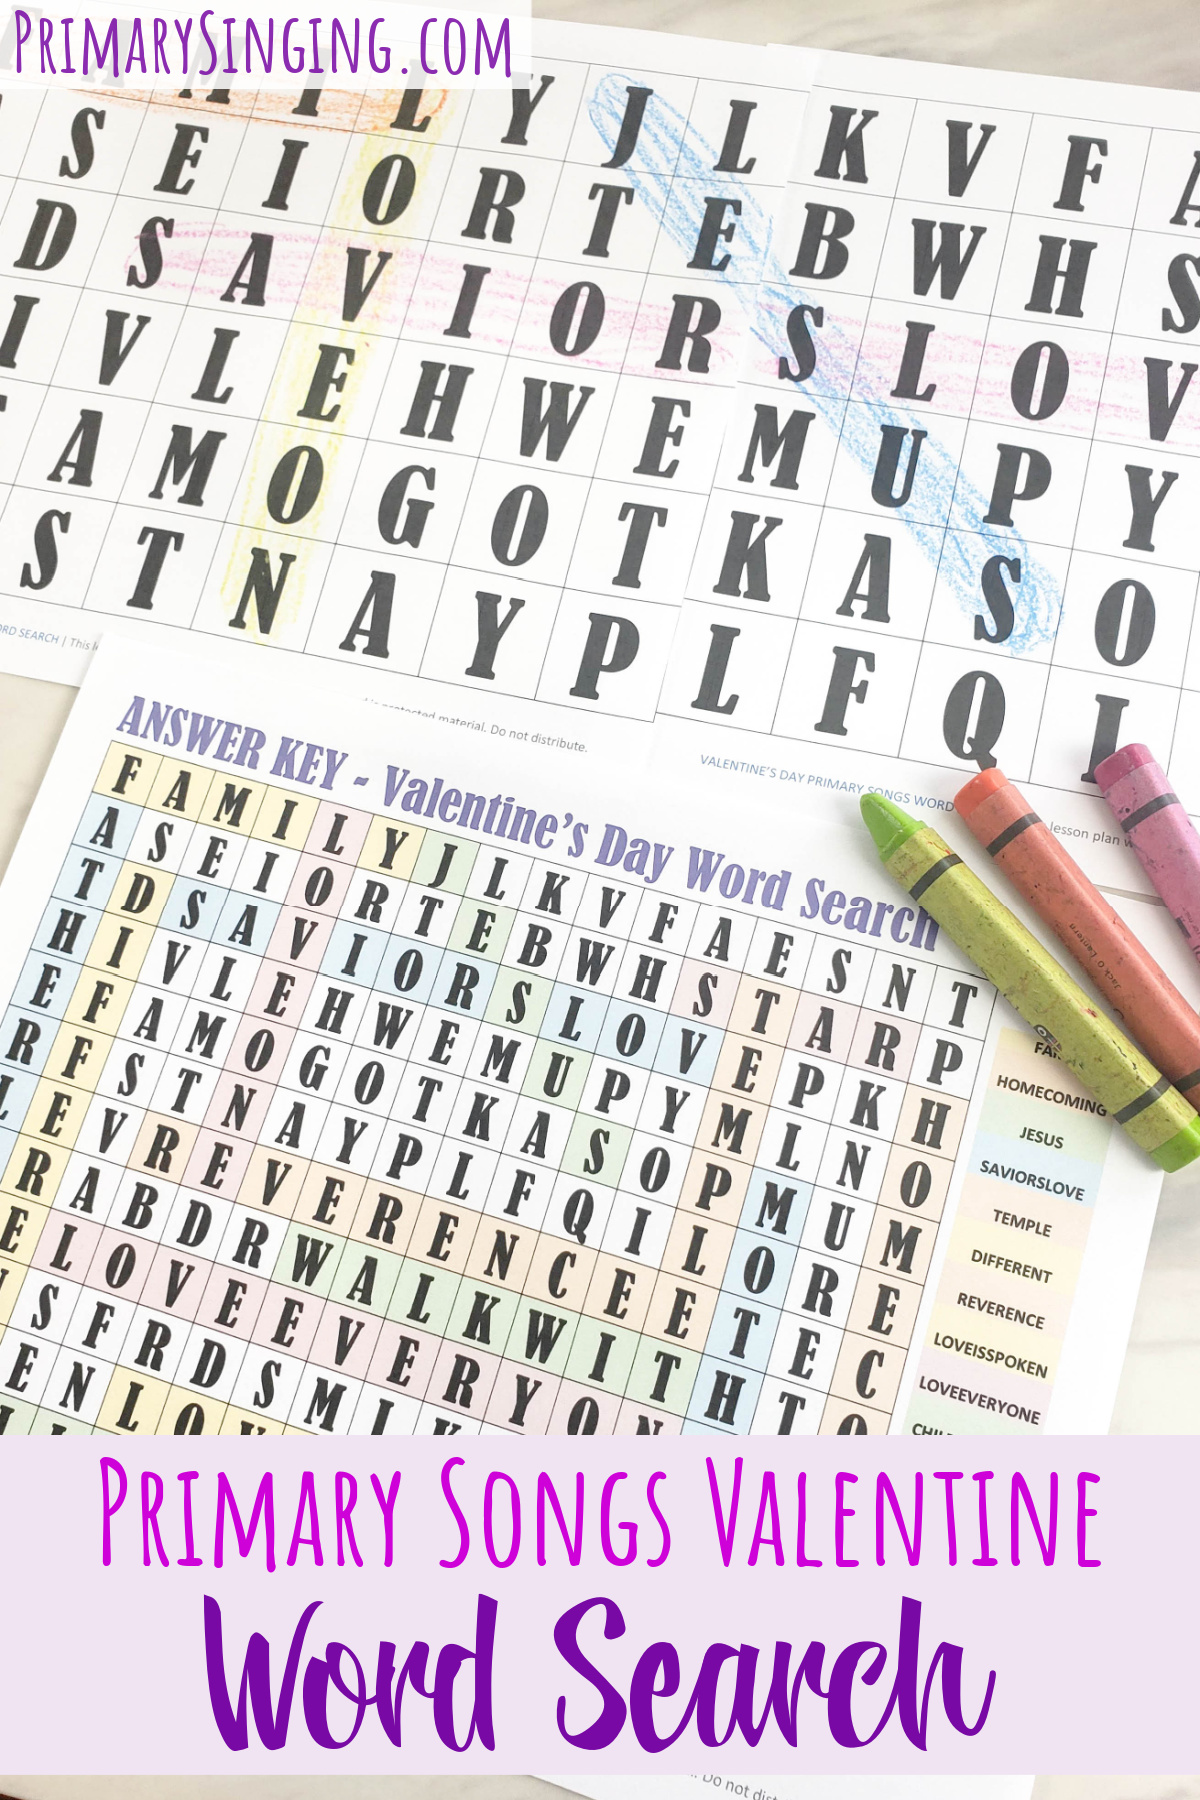 Primary Songs Valentine Word Search! This fun printable game includes a variety of LDS Primary Songs that are perfect for Valentine's Day and all about love! Includes a variety of fun ways to play including a large format printable across 4-pages or a 1-page individual size printable that can be used when teaching Come Follow Me Primary lessons. 